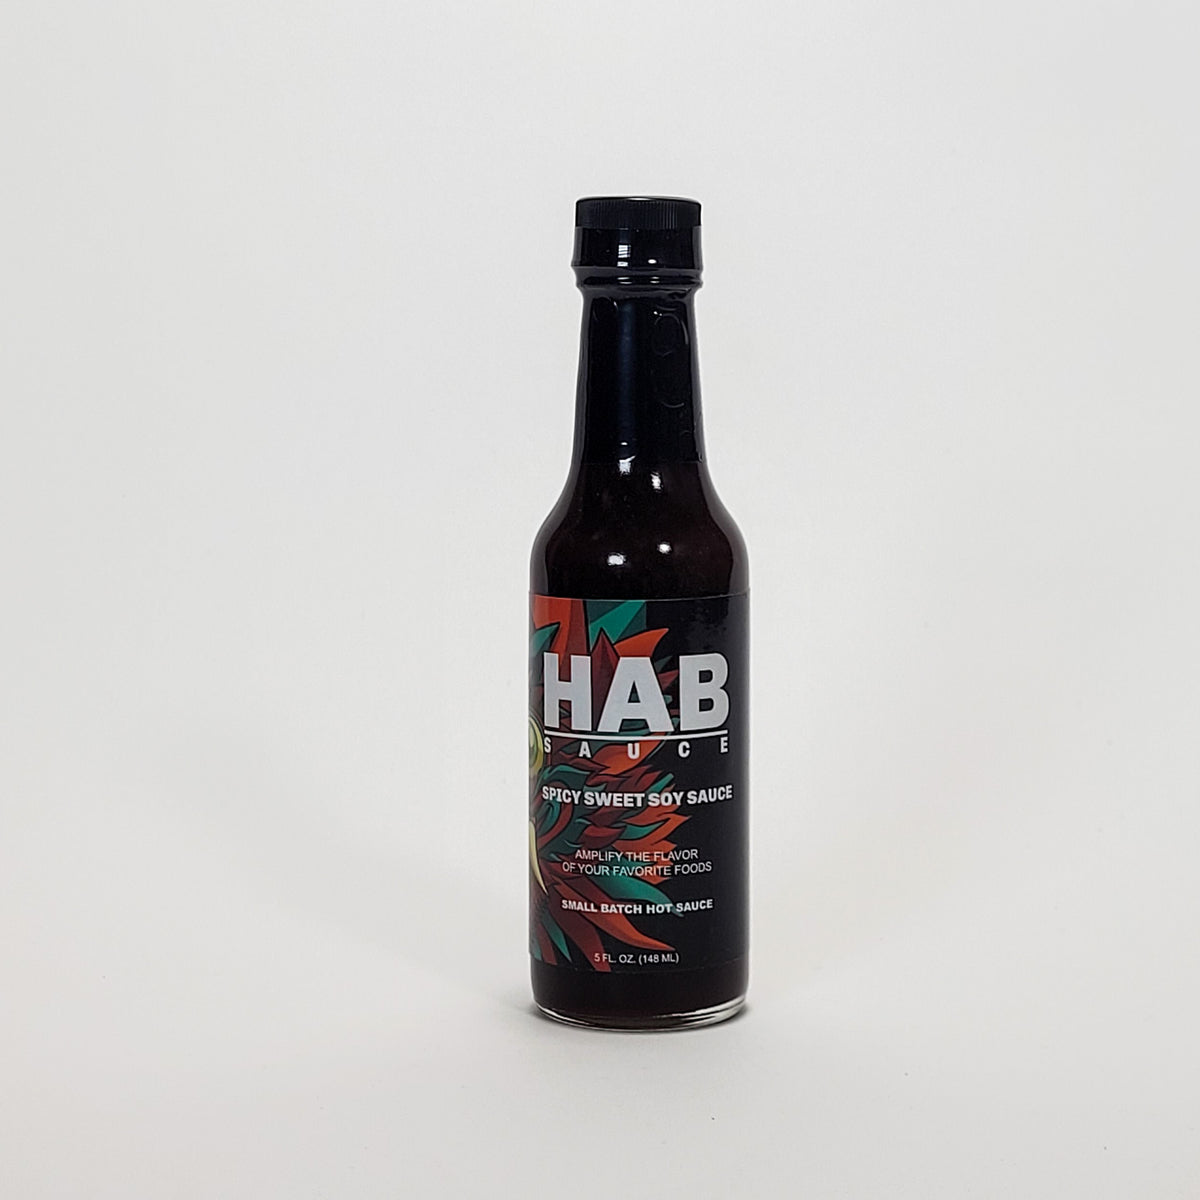 Hab Sauce Spicy Sweet Soy Sauce 